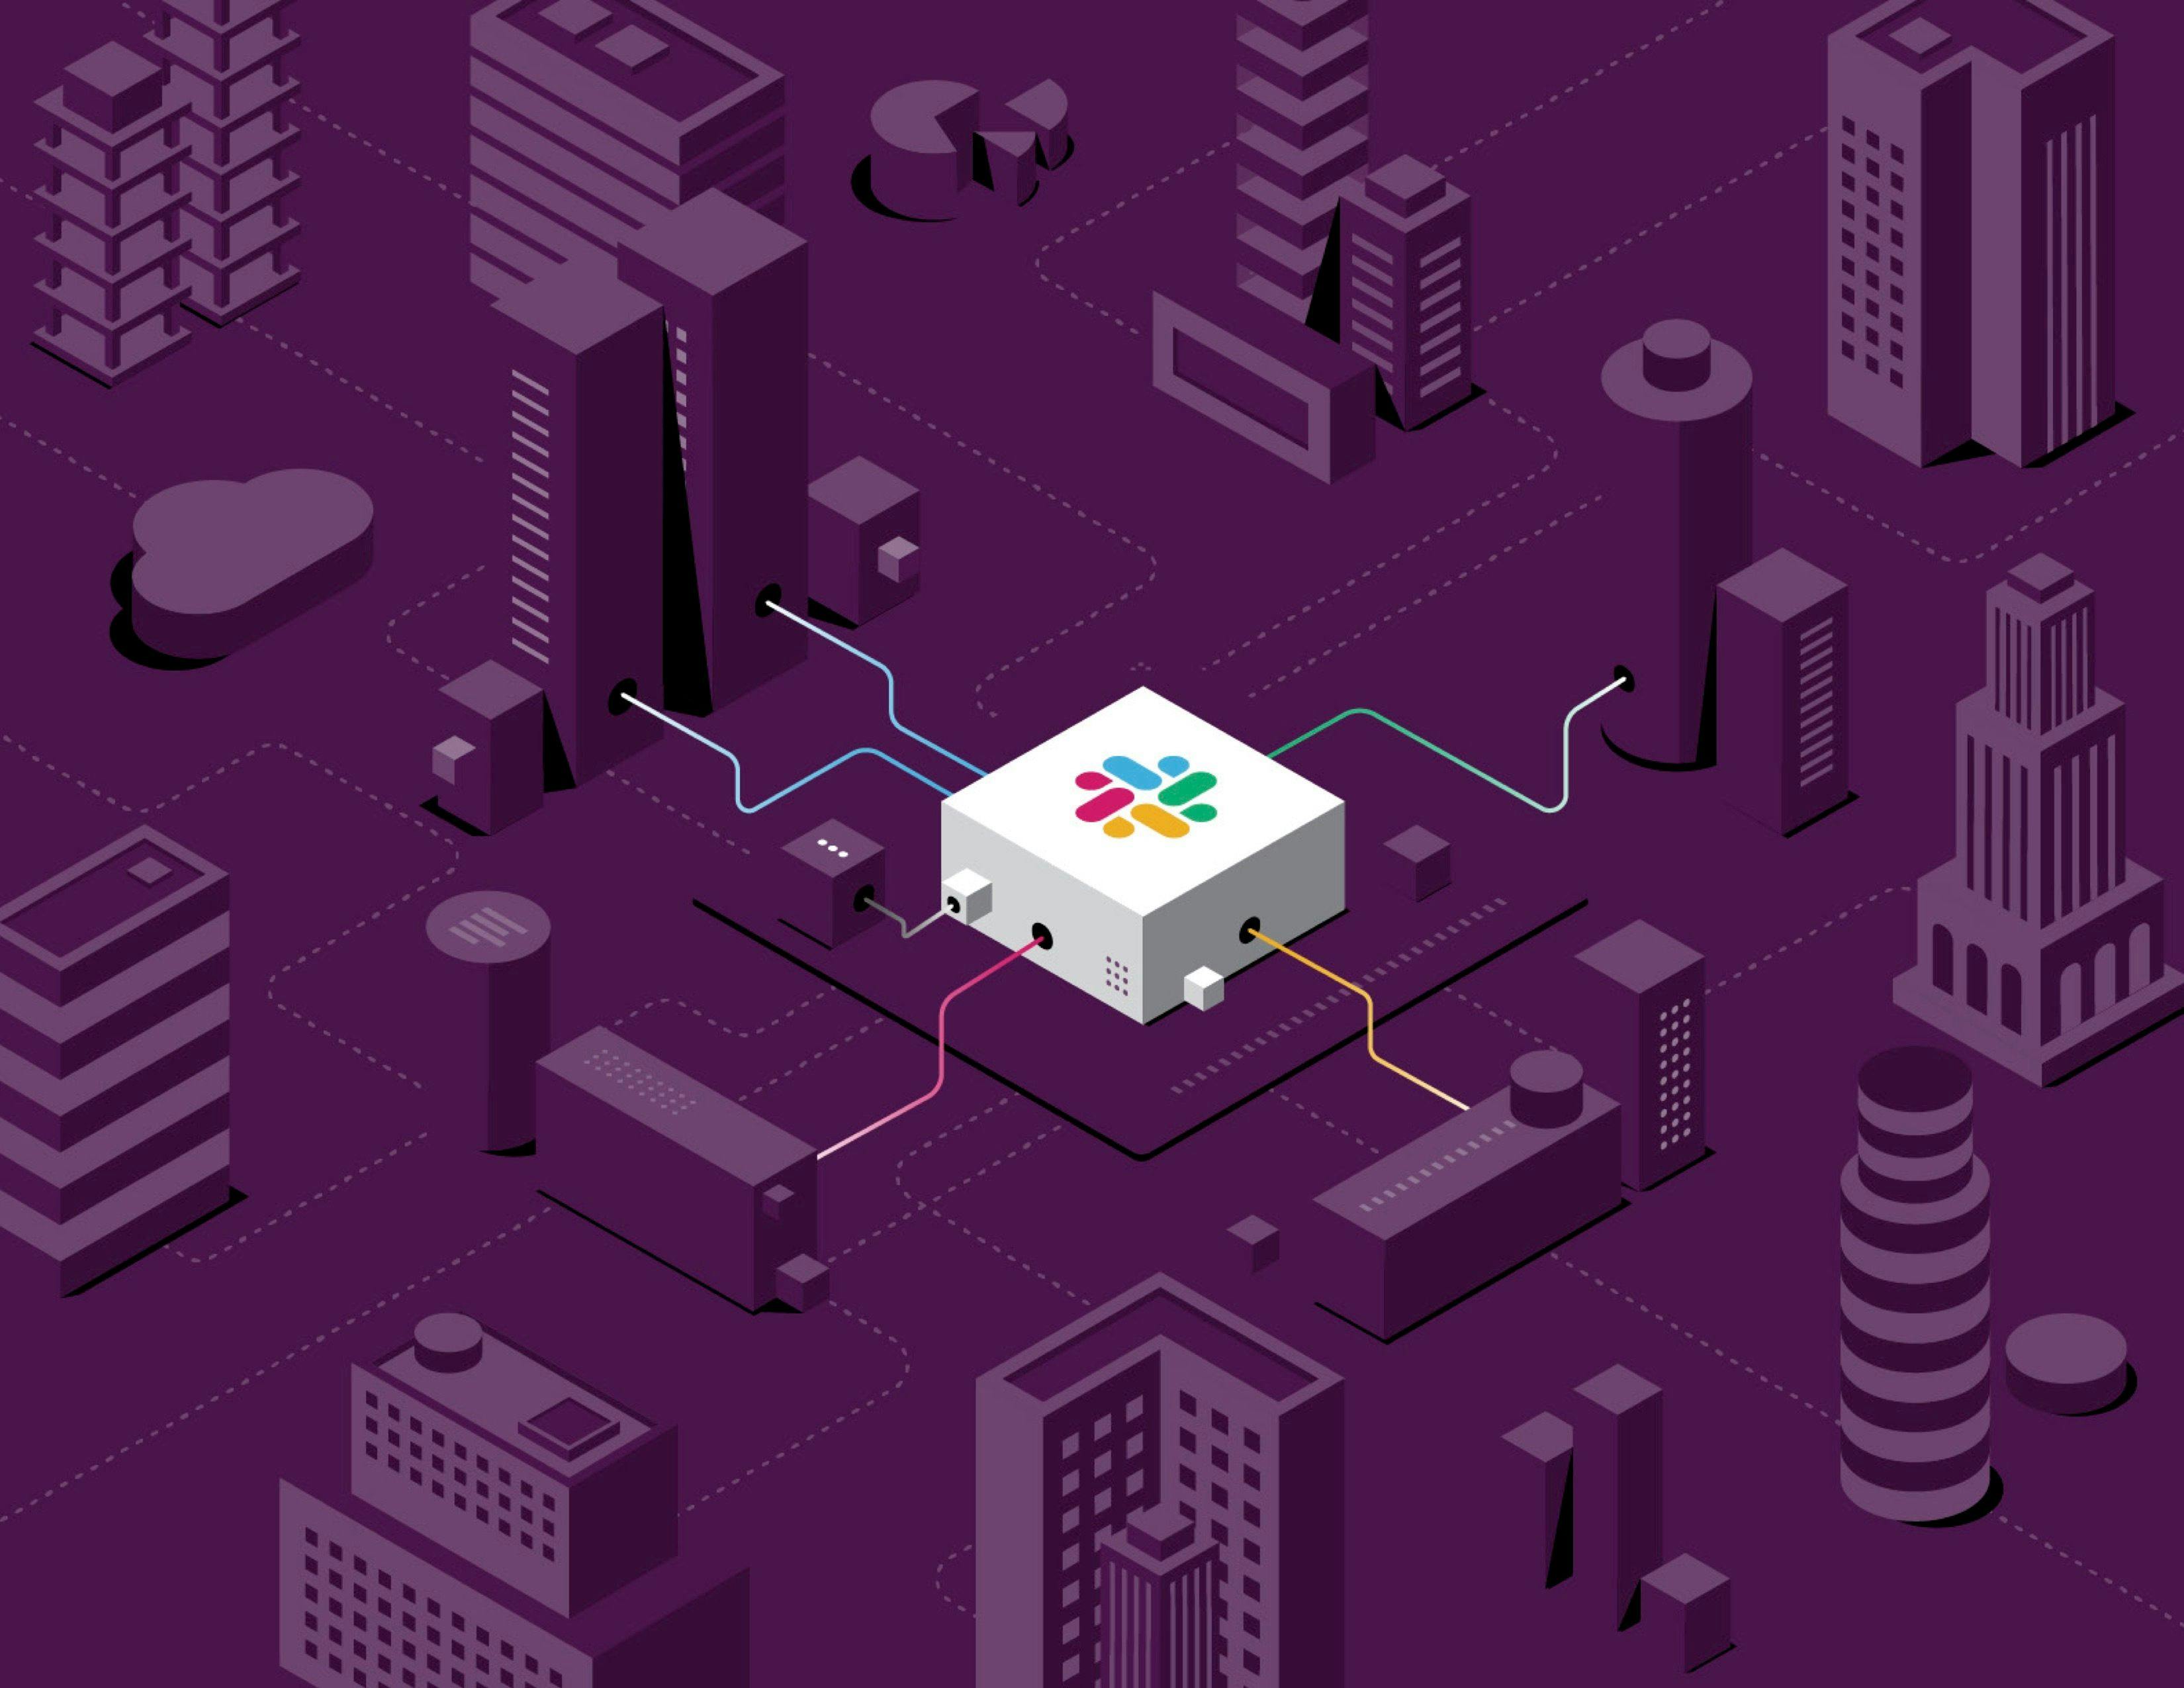 Slack, connected to other organizations